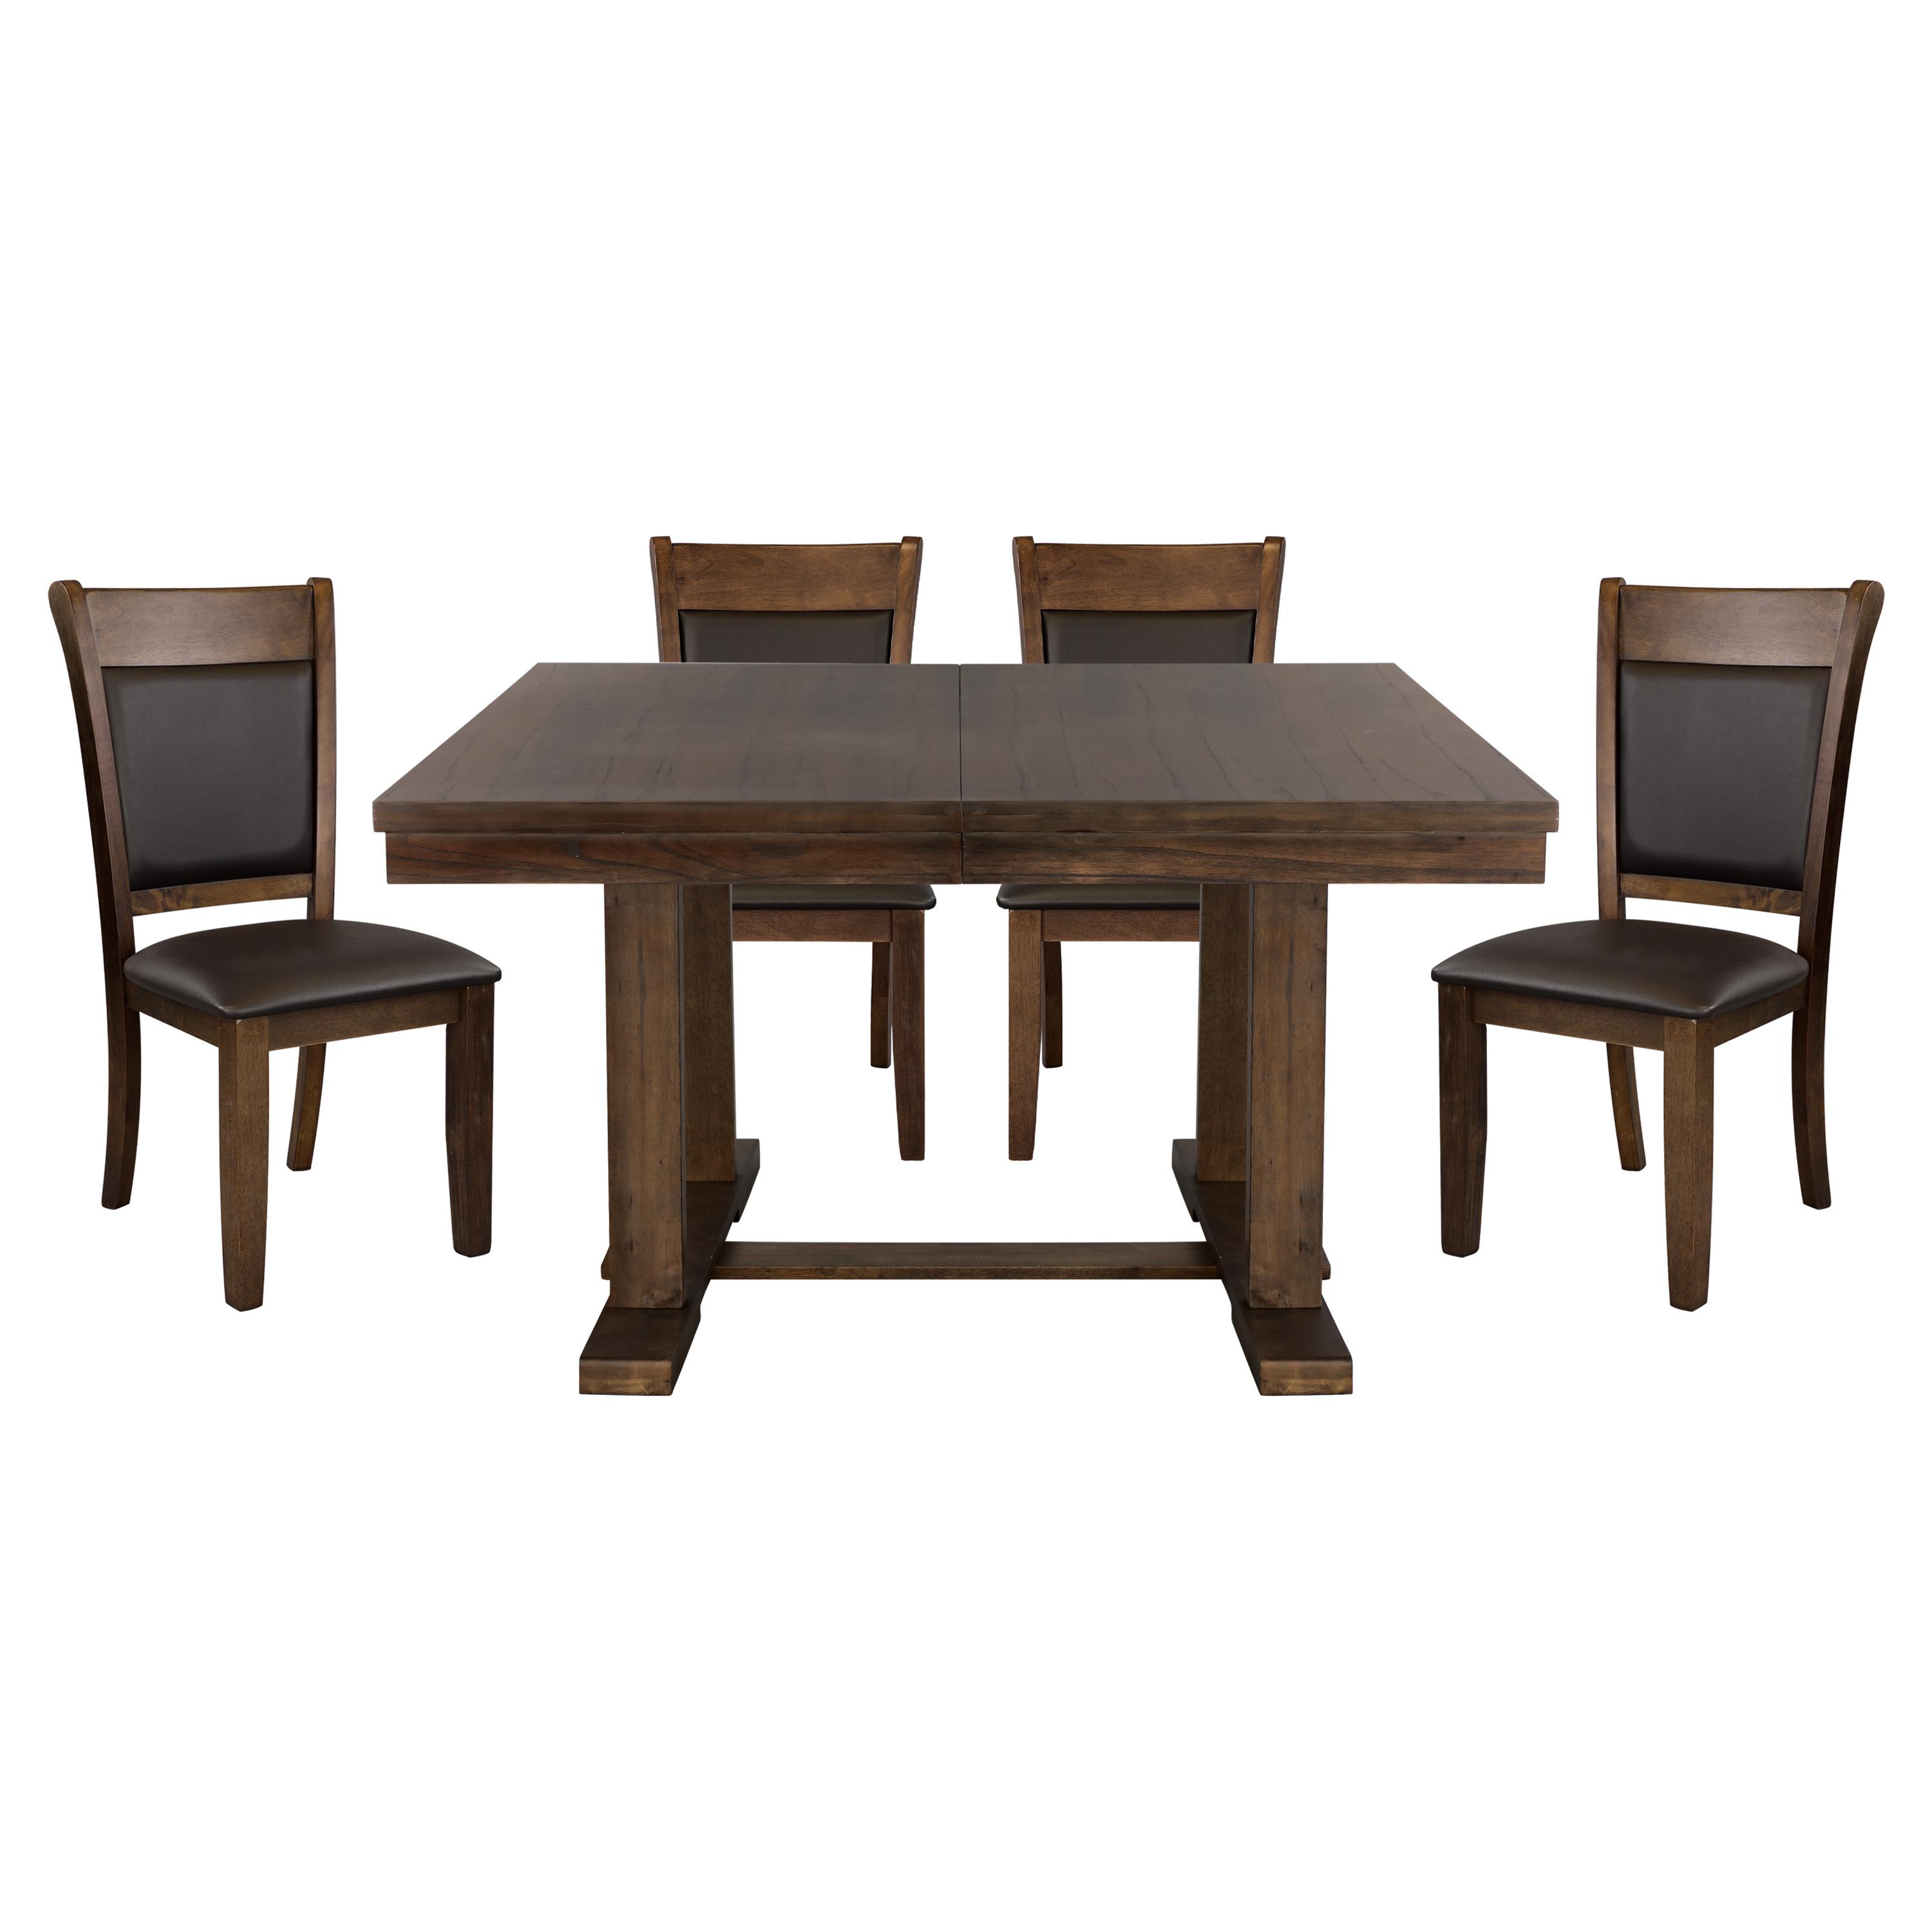 Transitional Dining Room Set 5614-72*5PC Wieland 5614-72*5PC in Rustic Brown Faux Leather